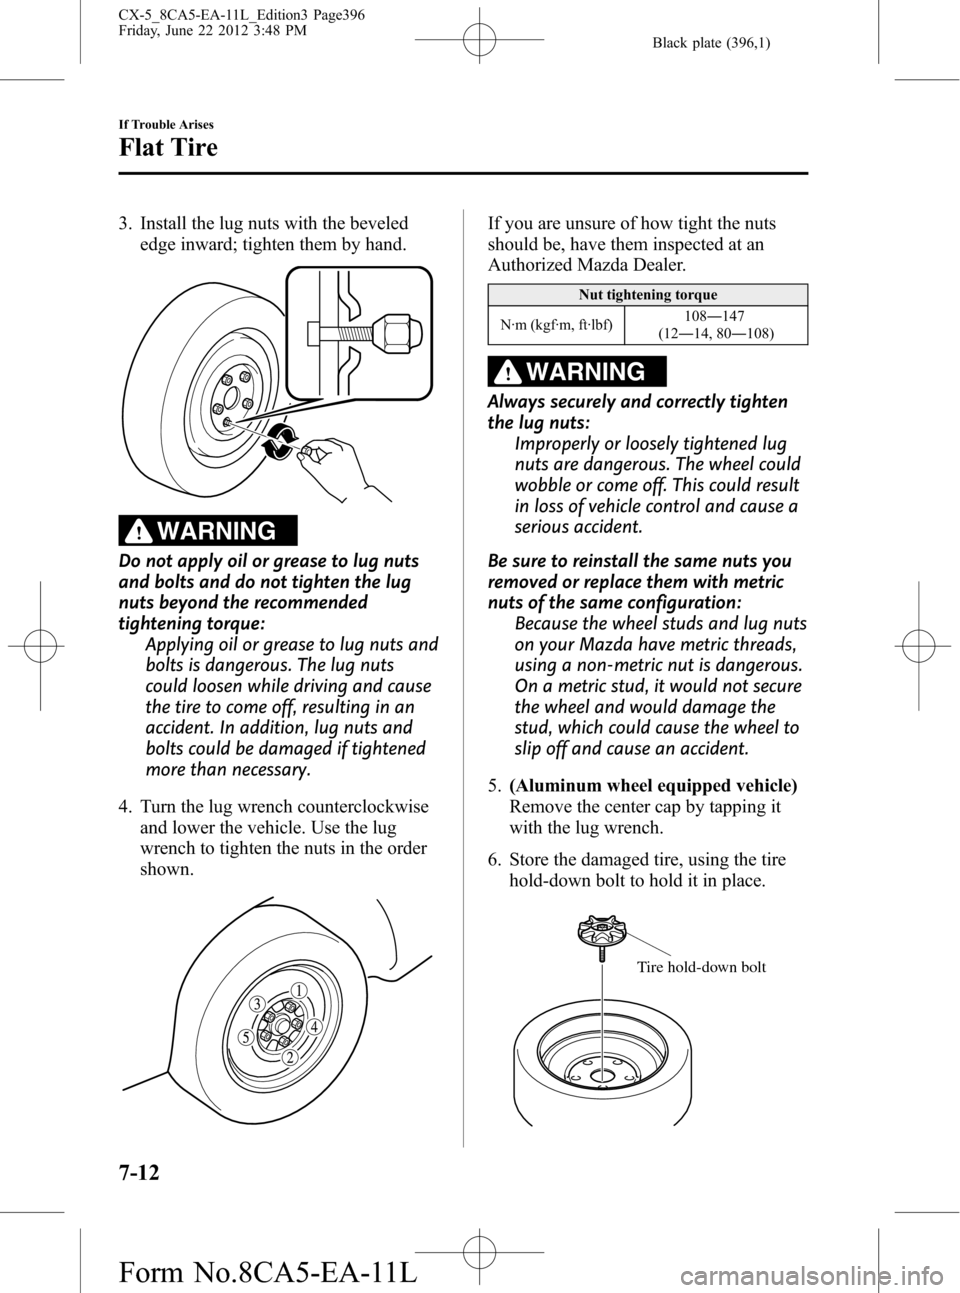 MAZDA MODEL CX-5 2013  Owners Manual (in English) Black plate (396,1)
3. Install the lug nuts with the beveled
edge inward; tighten them by hand.
WARNING
Do not apply oil or grease to lug nuts
and bolts and do not tighten the lug
nuts beyond the reco